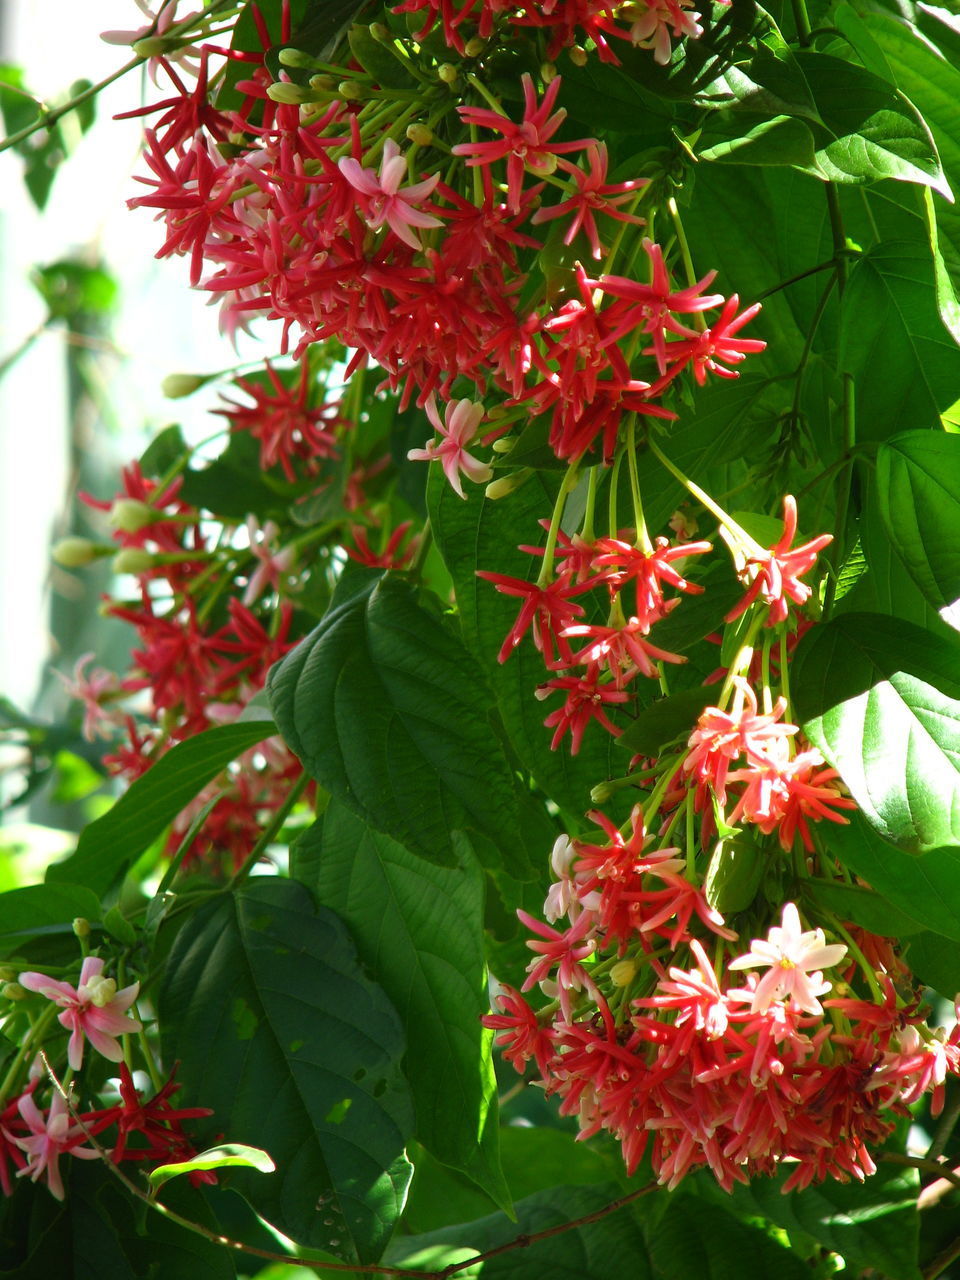 CLOSE-UP OF RED FLOWERS ON PLANT OUTDOORS